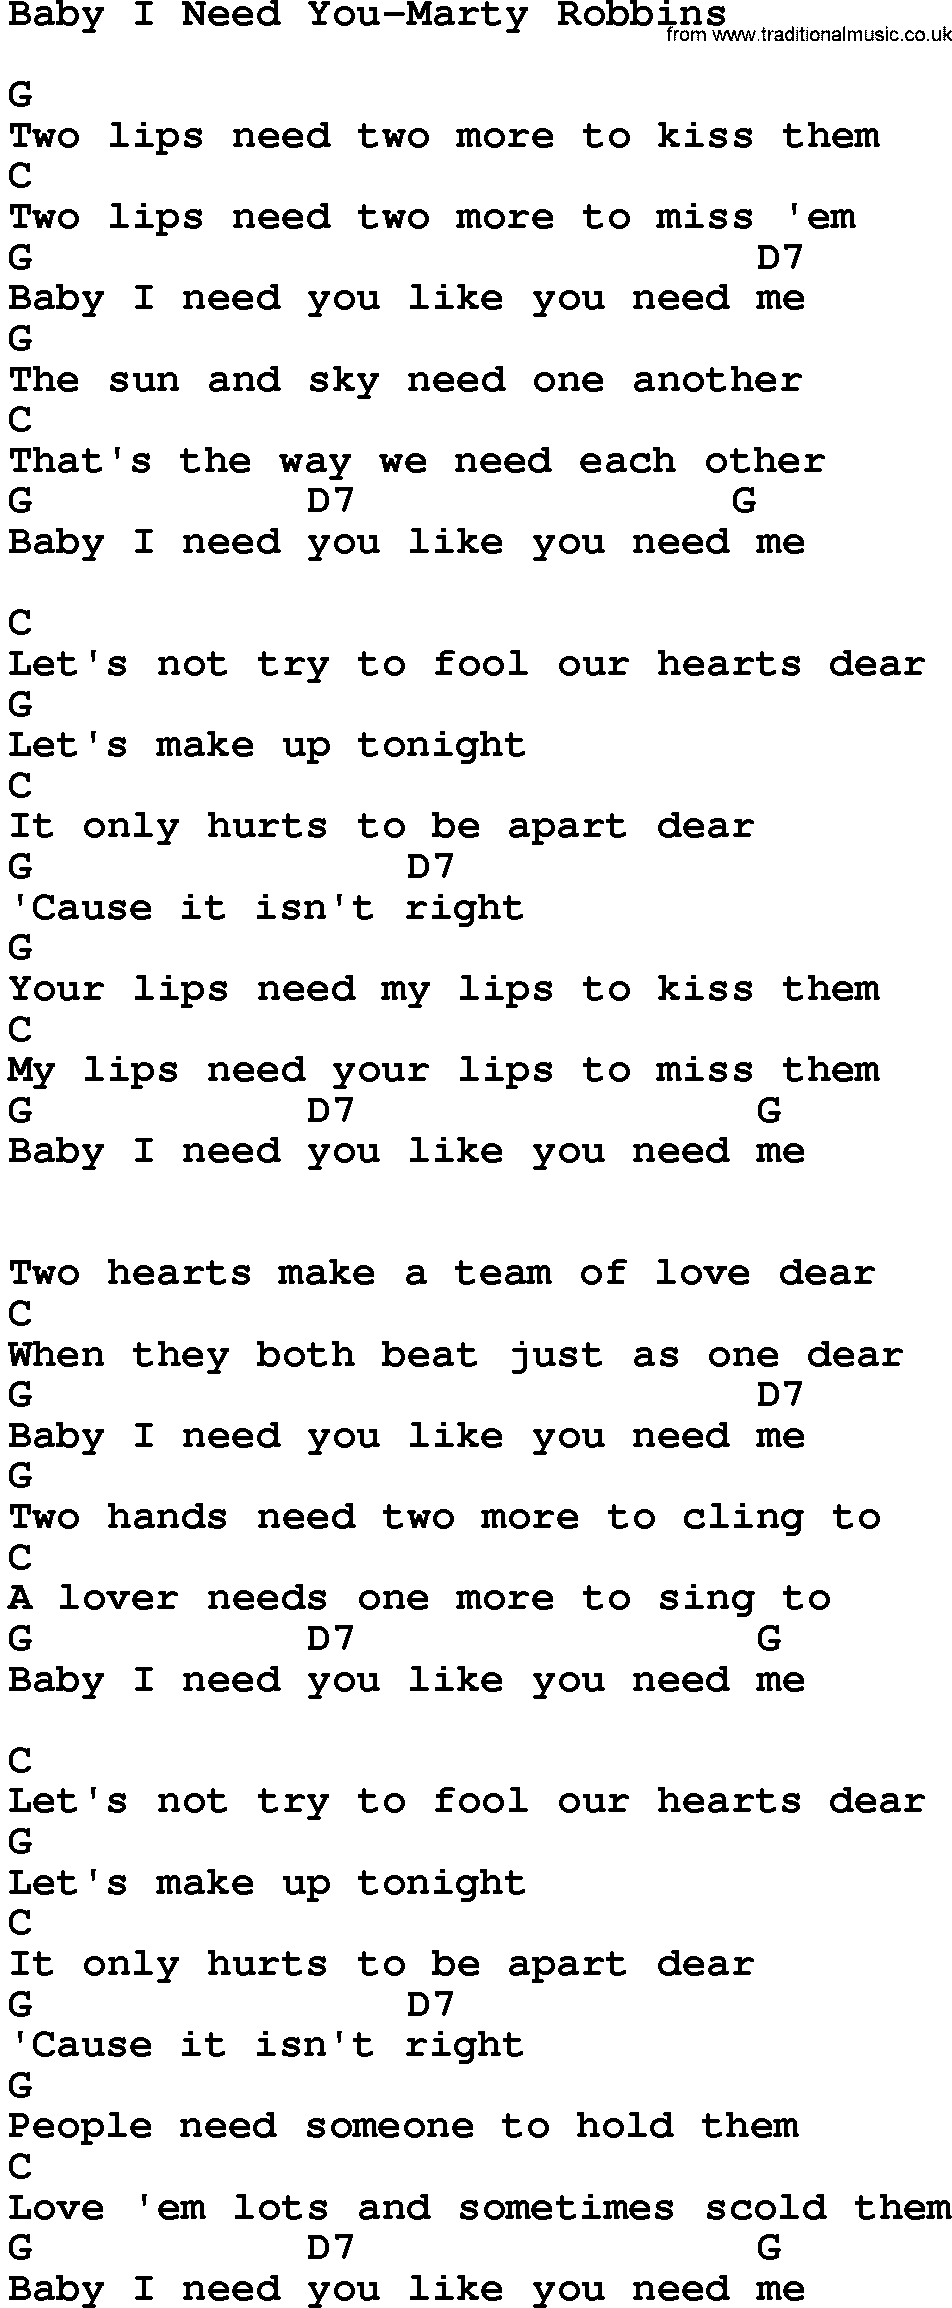 Country music song: Baby I Need You-Marty Robbins lyrics and chords